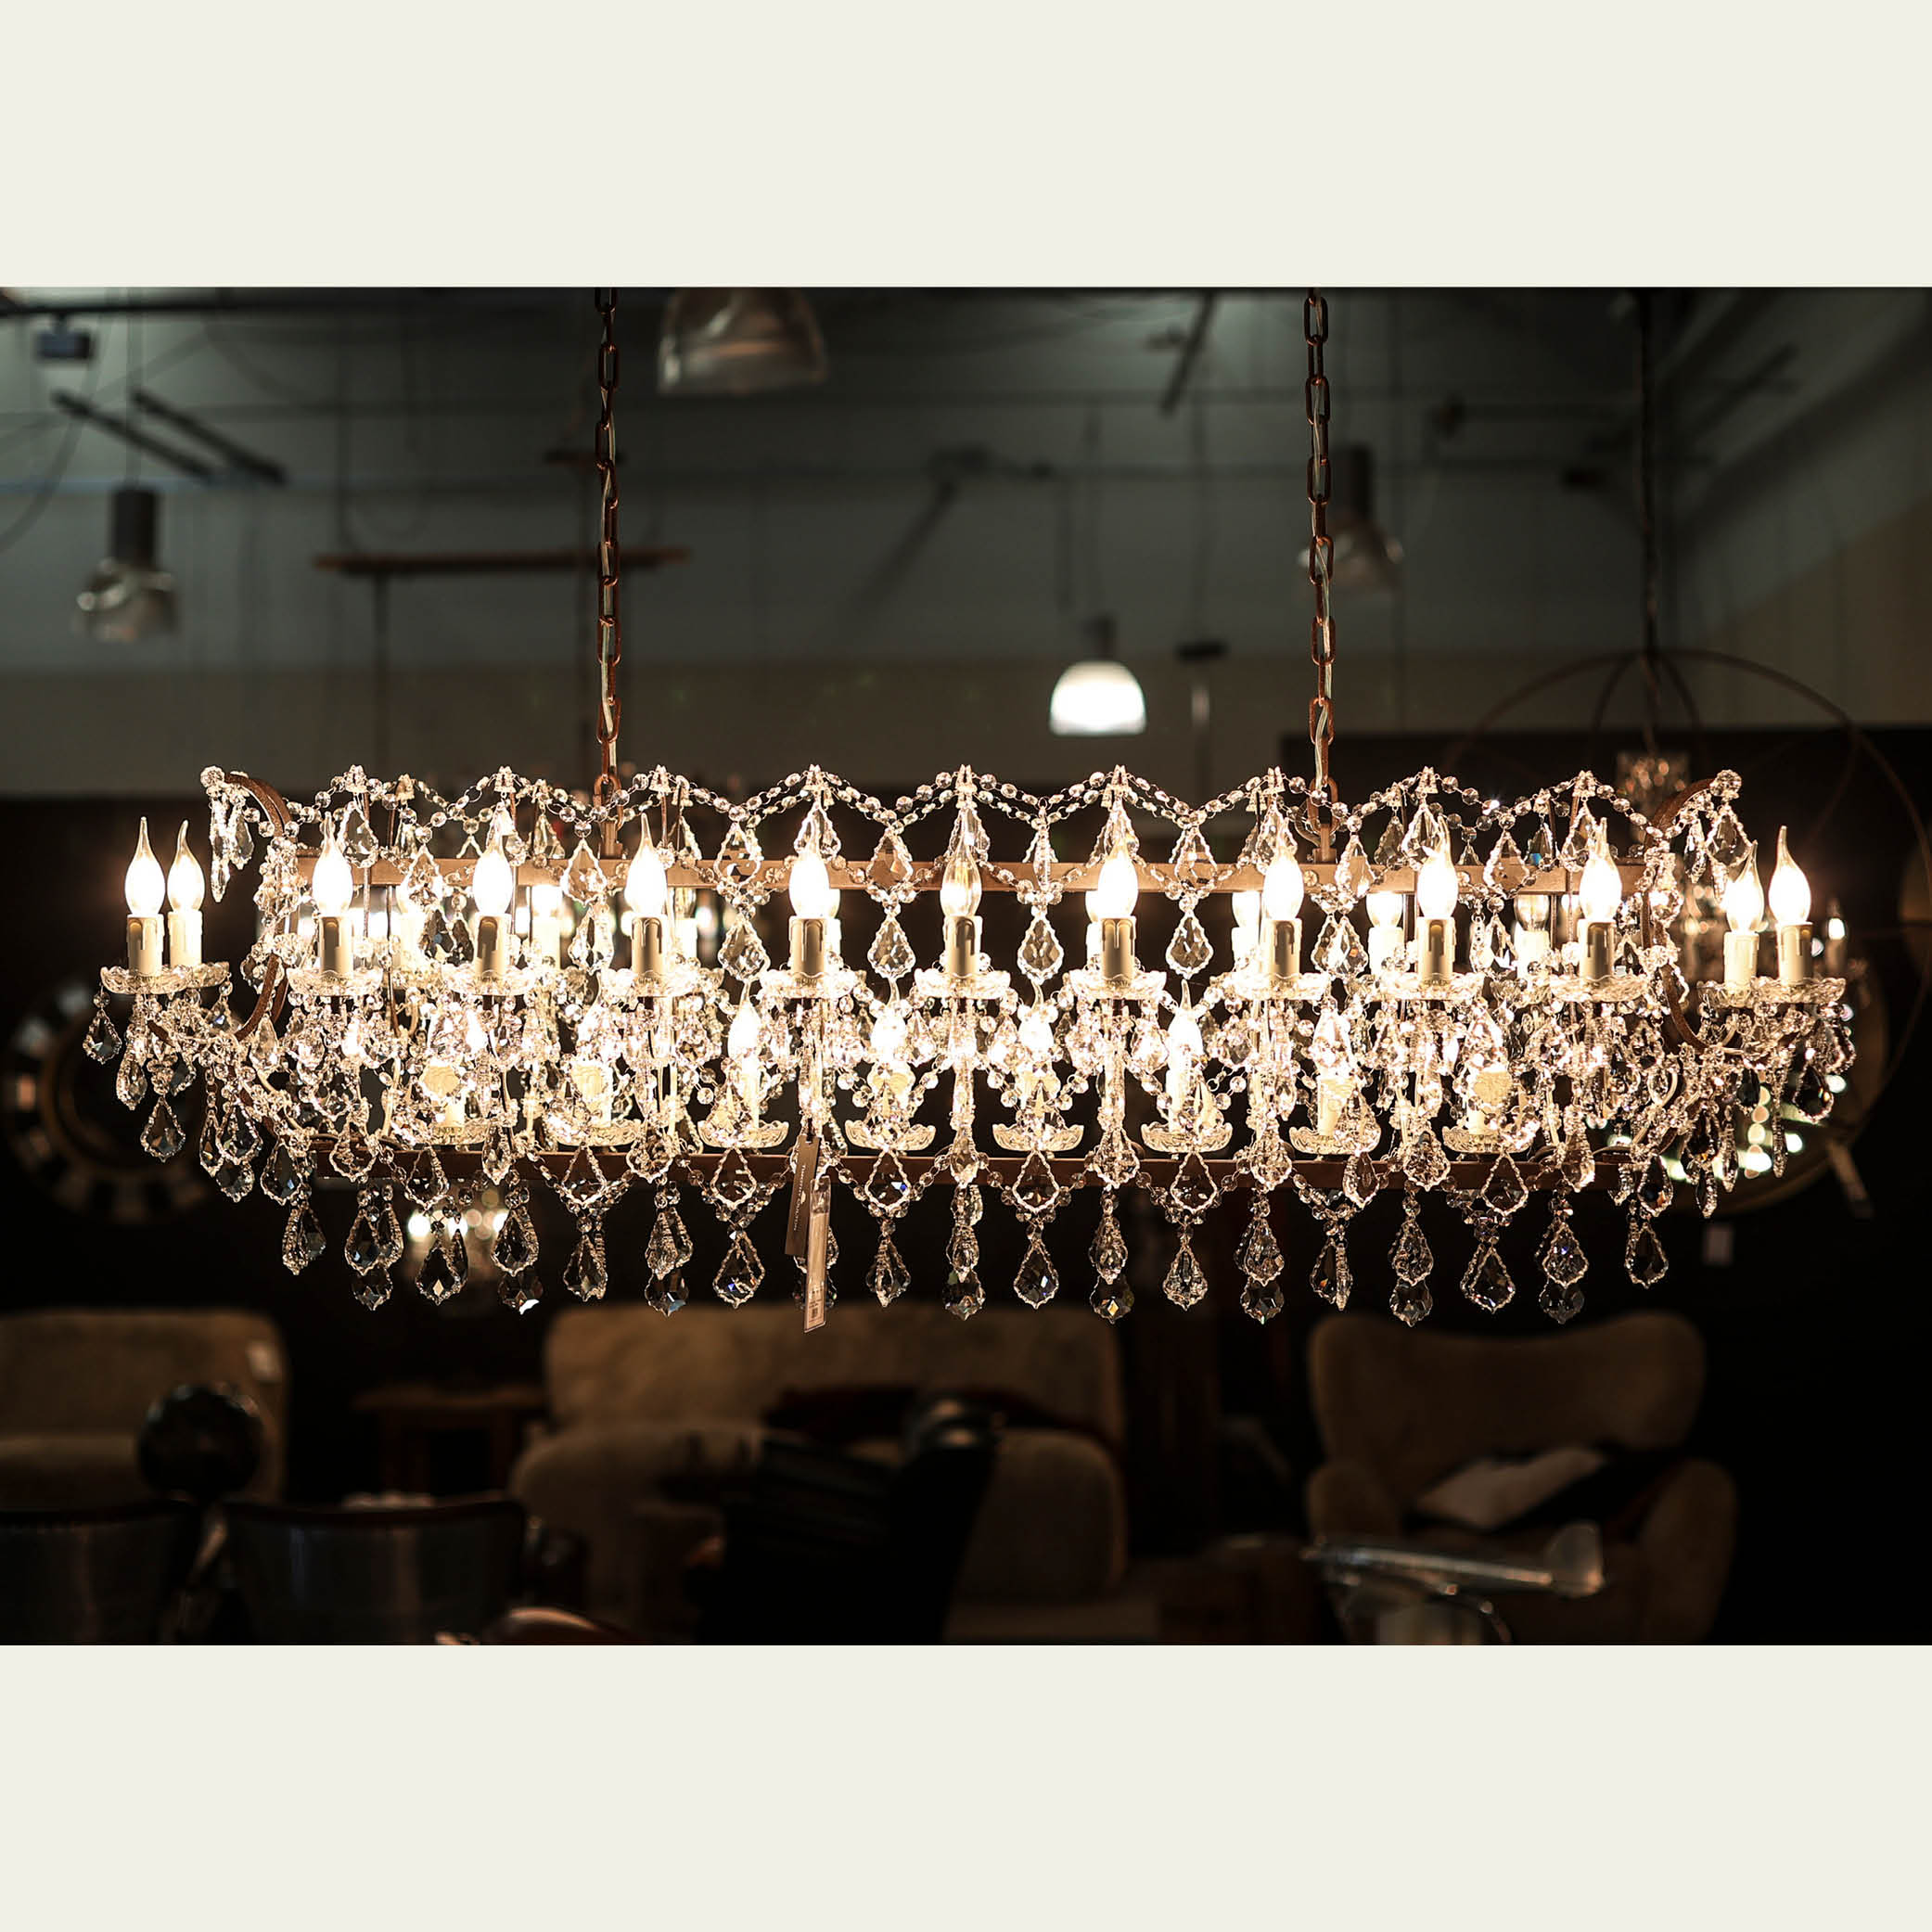 EXPO Timothy Oulton CRYSTAL chandelier